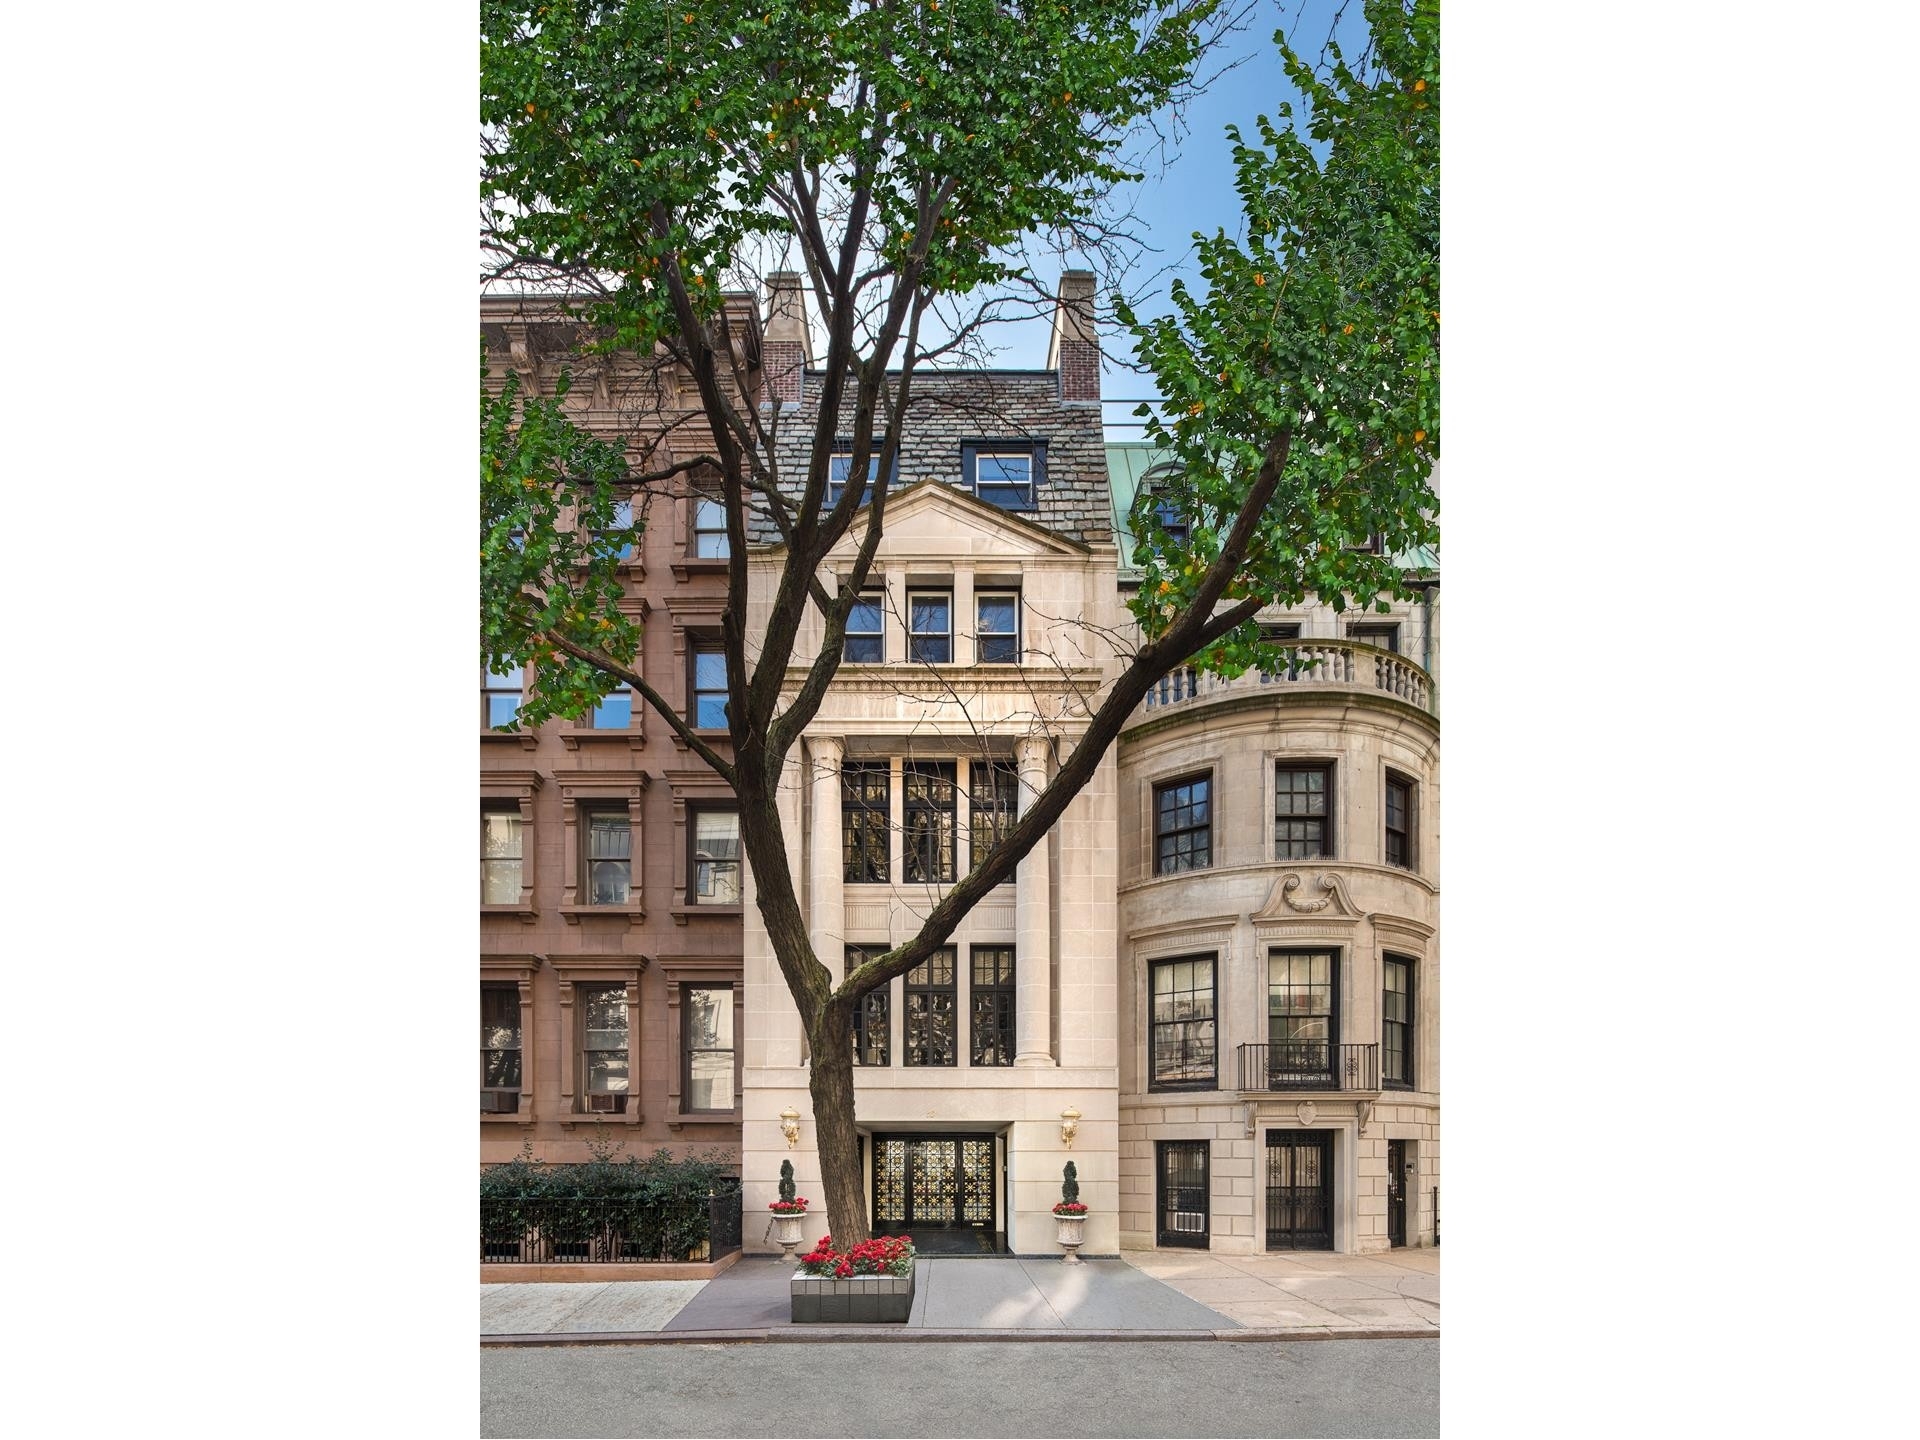 1. Single Family Townhouse for Sale at 10 E 64TH ST, TOWNHOUSE Lenox Hill, New York, New York 10065